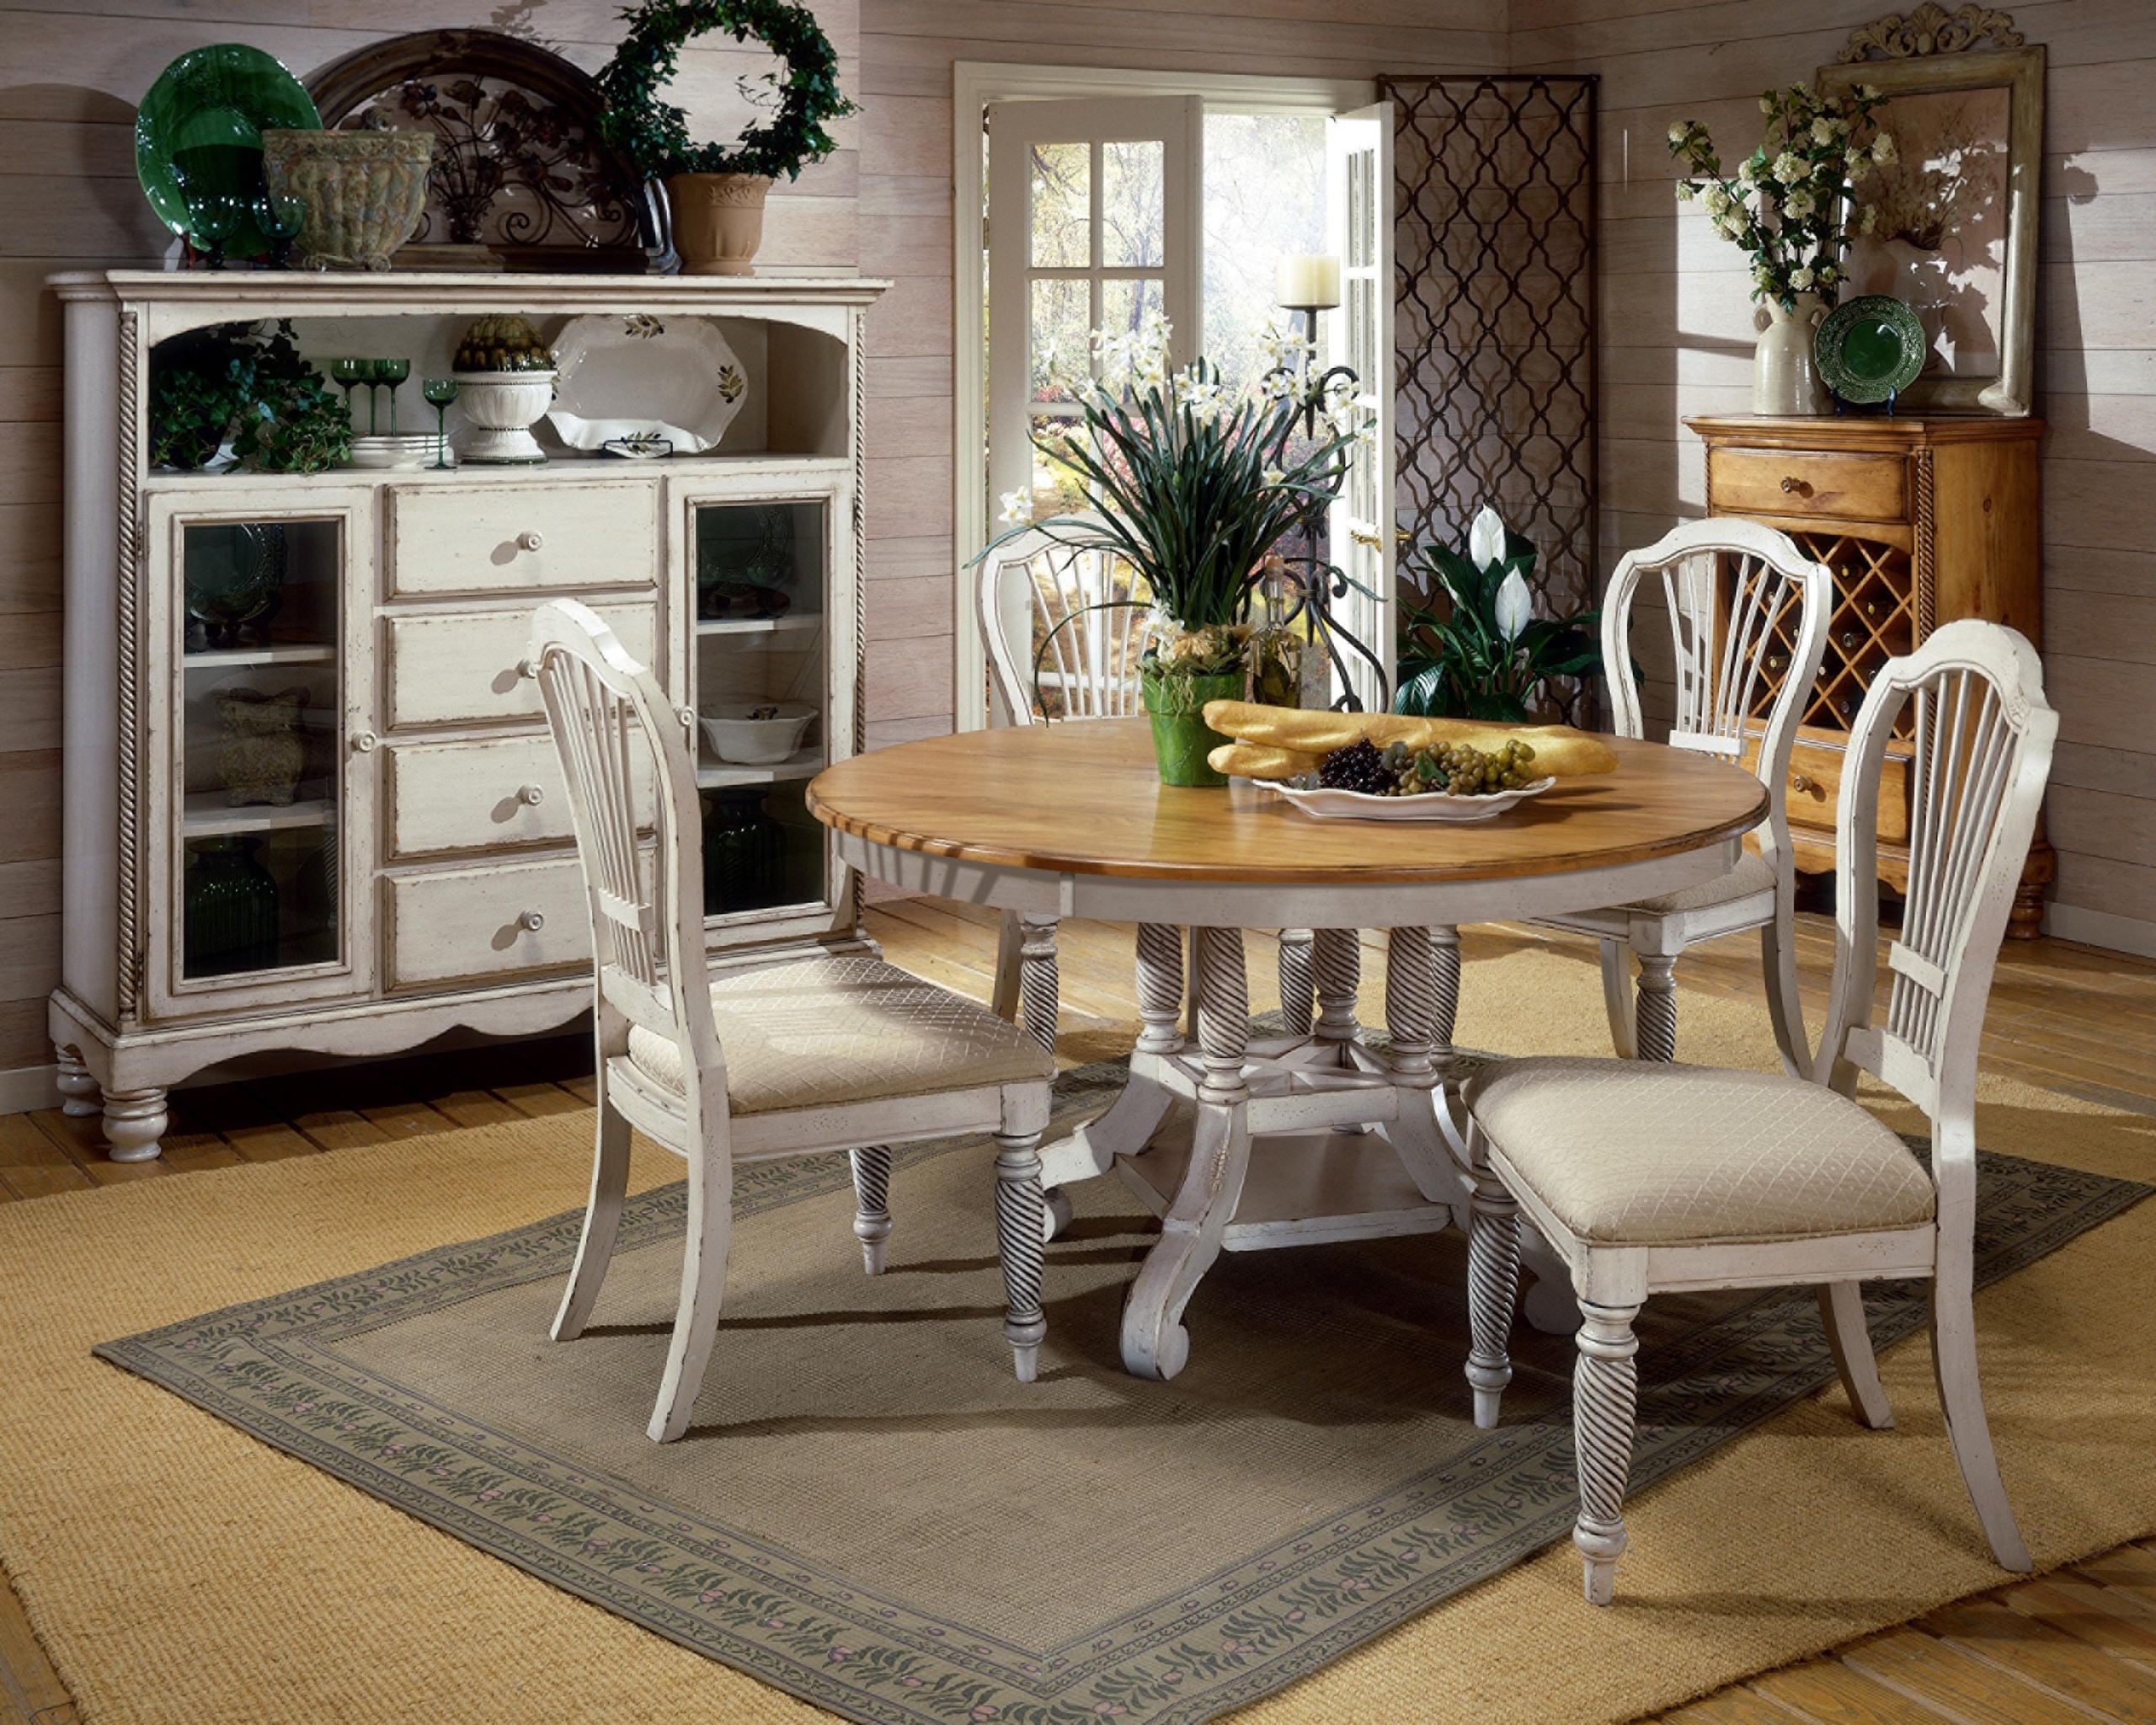 French Country Dining Table Visualhunt, French Country Kitchen Round Table And Chairs